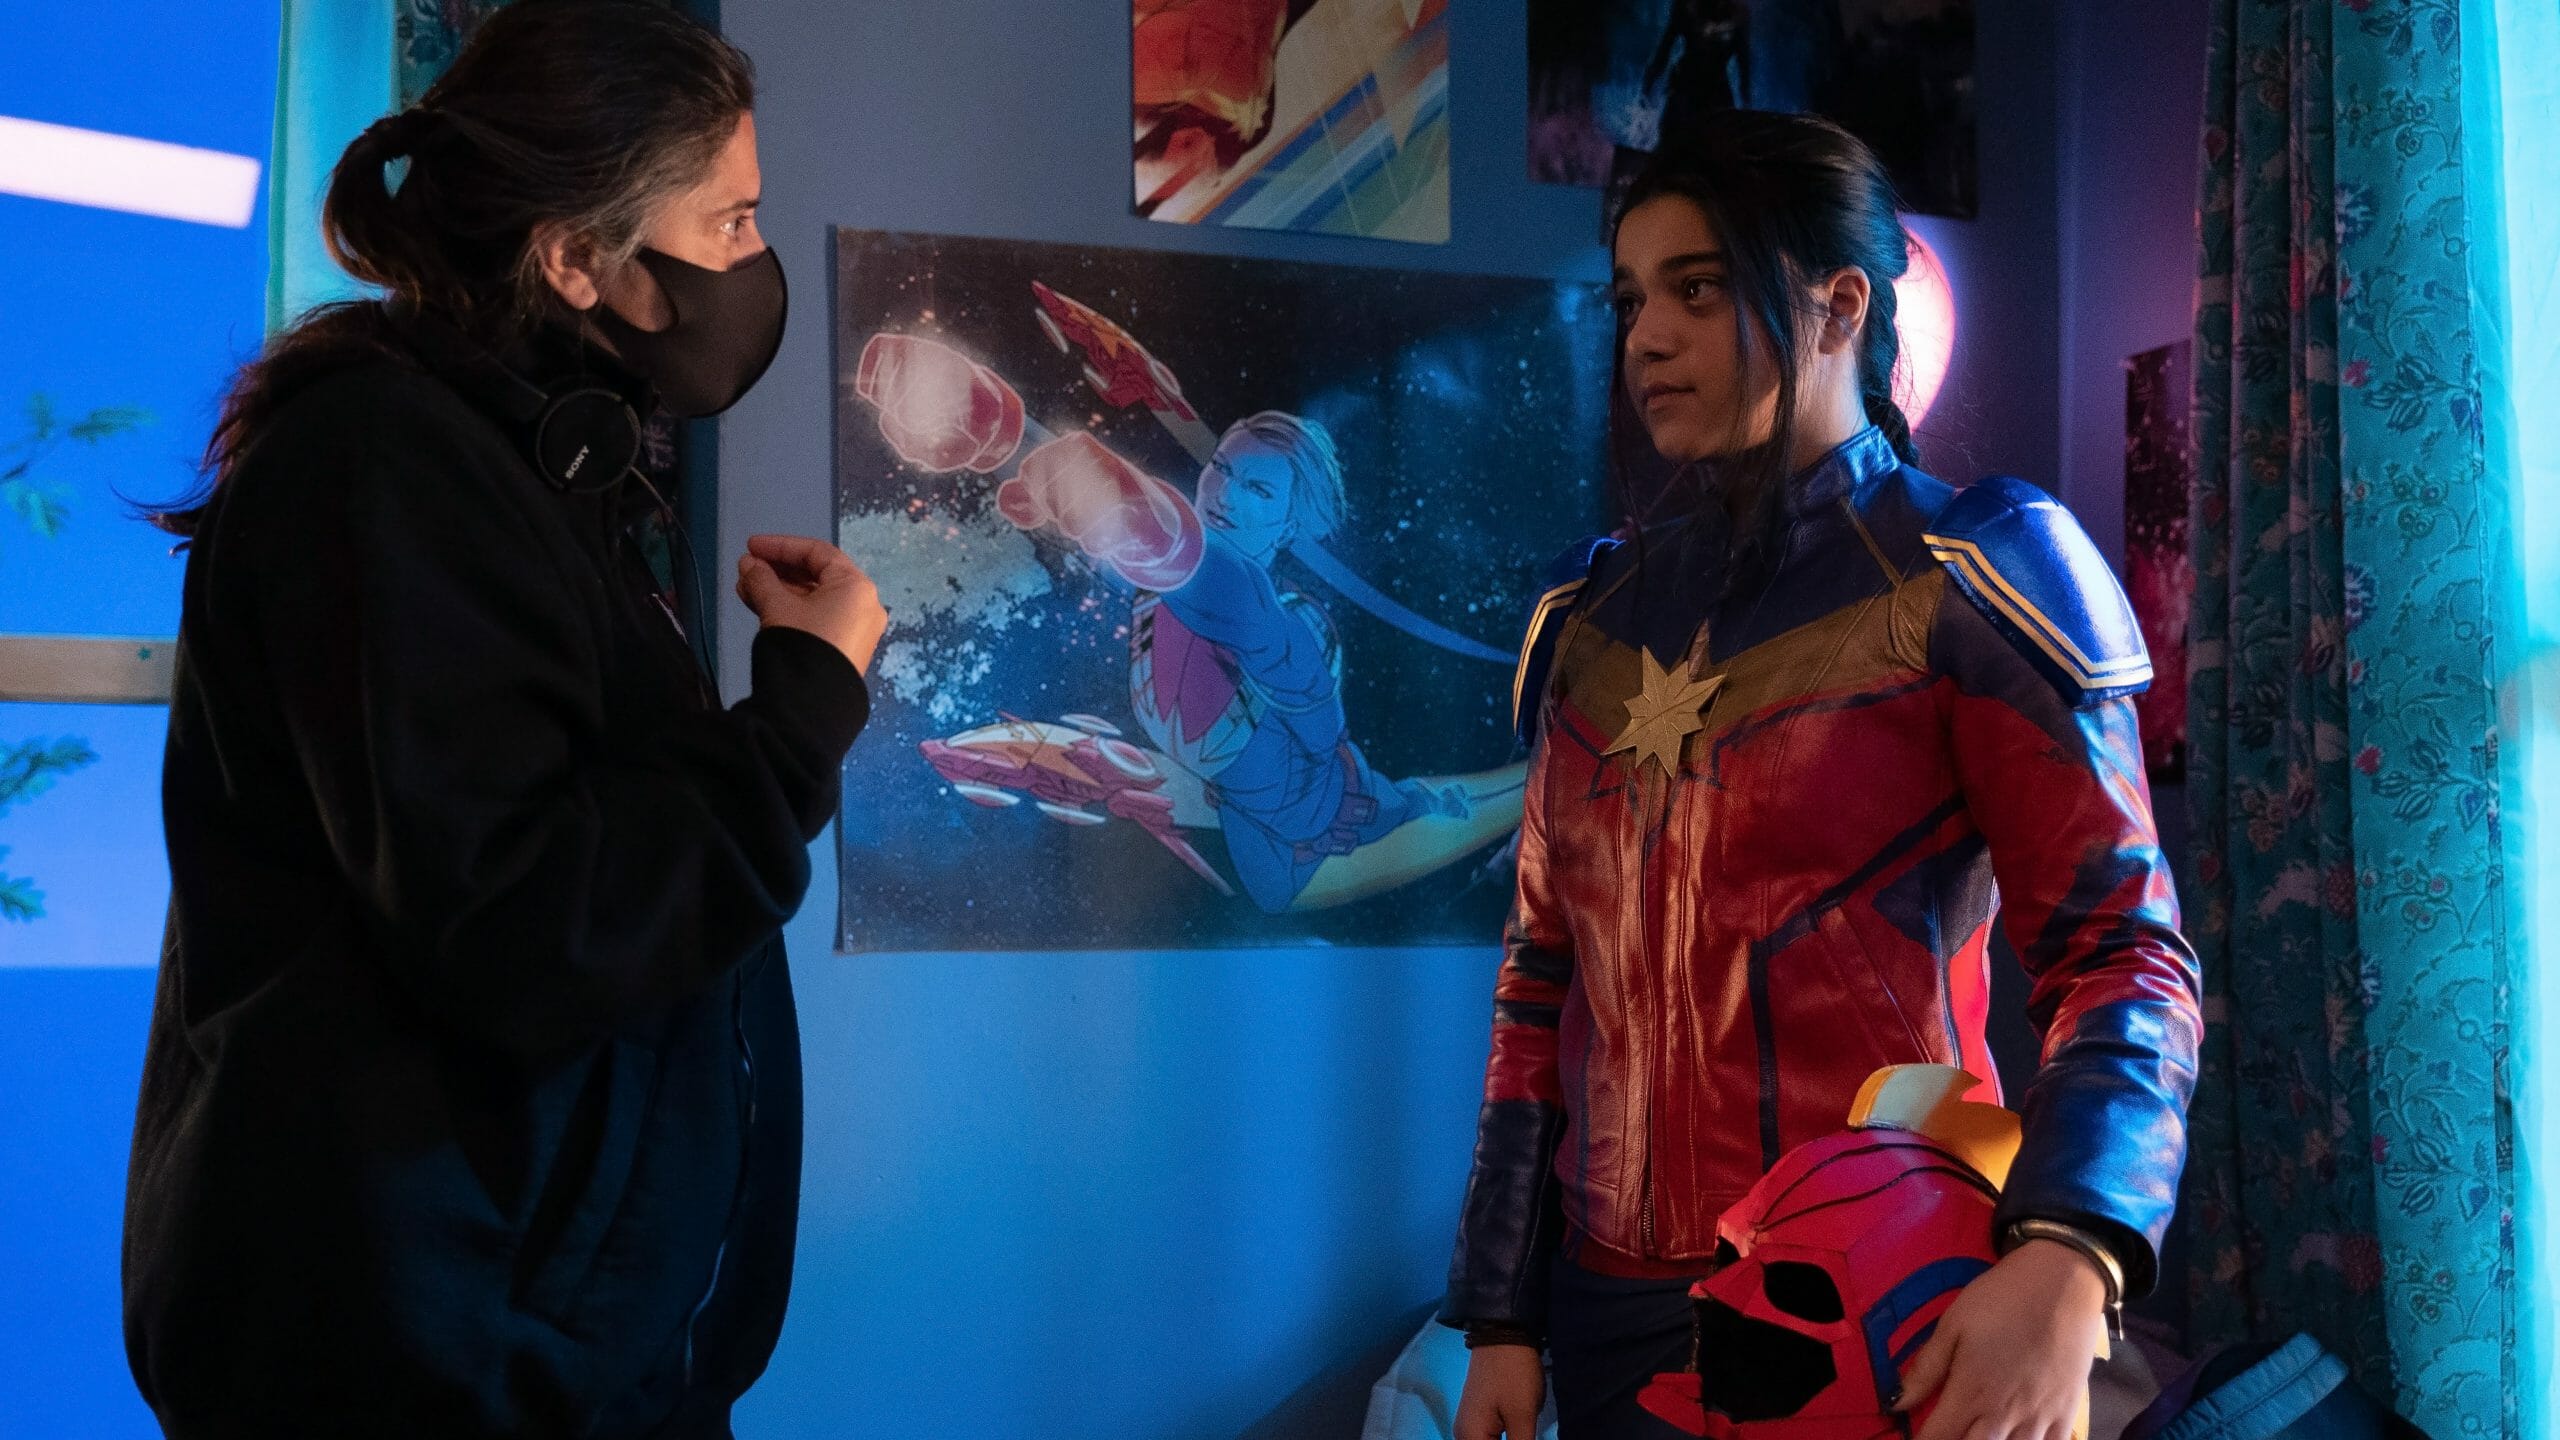 Director Sharmeen Obaid-Chinoy guides Iman Vellani in full Captain Marvel cosplay through a scene in her room full of superhero posters on the set of the MCU Disney+ series MS. MARVEL.